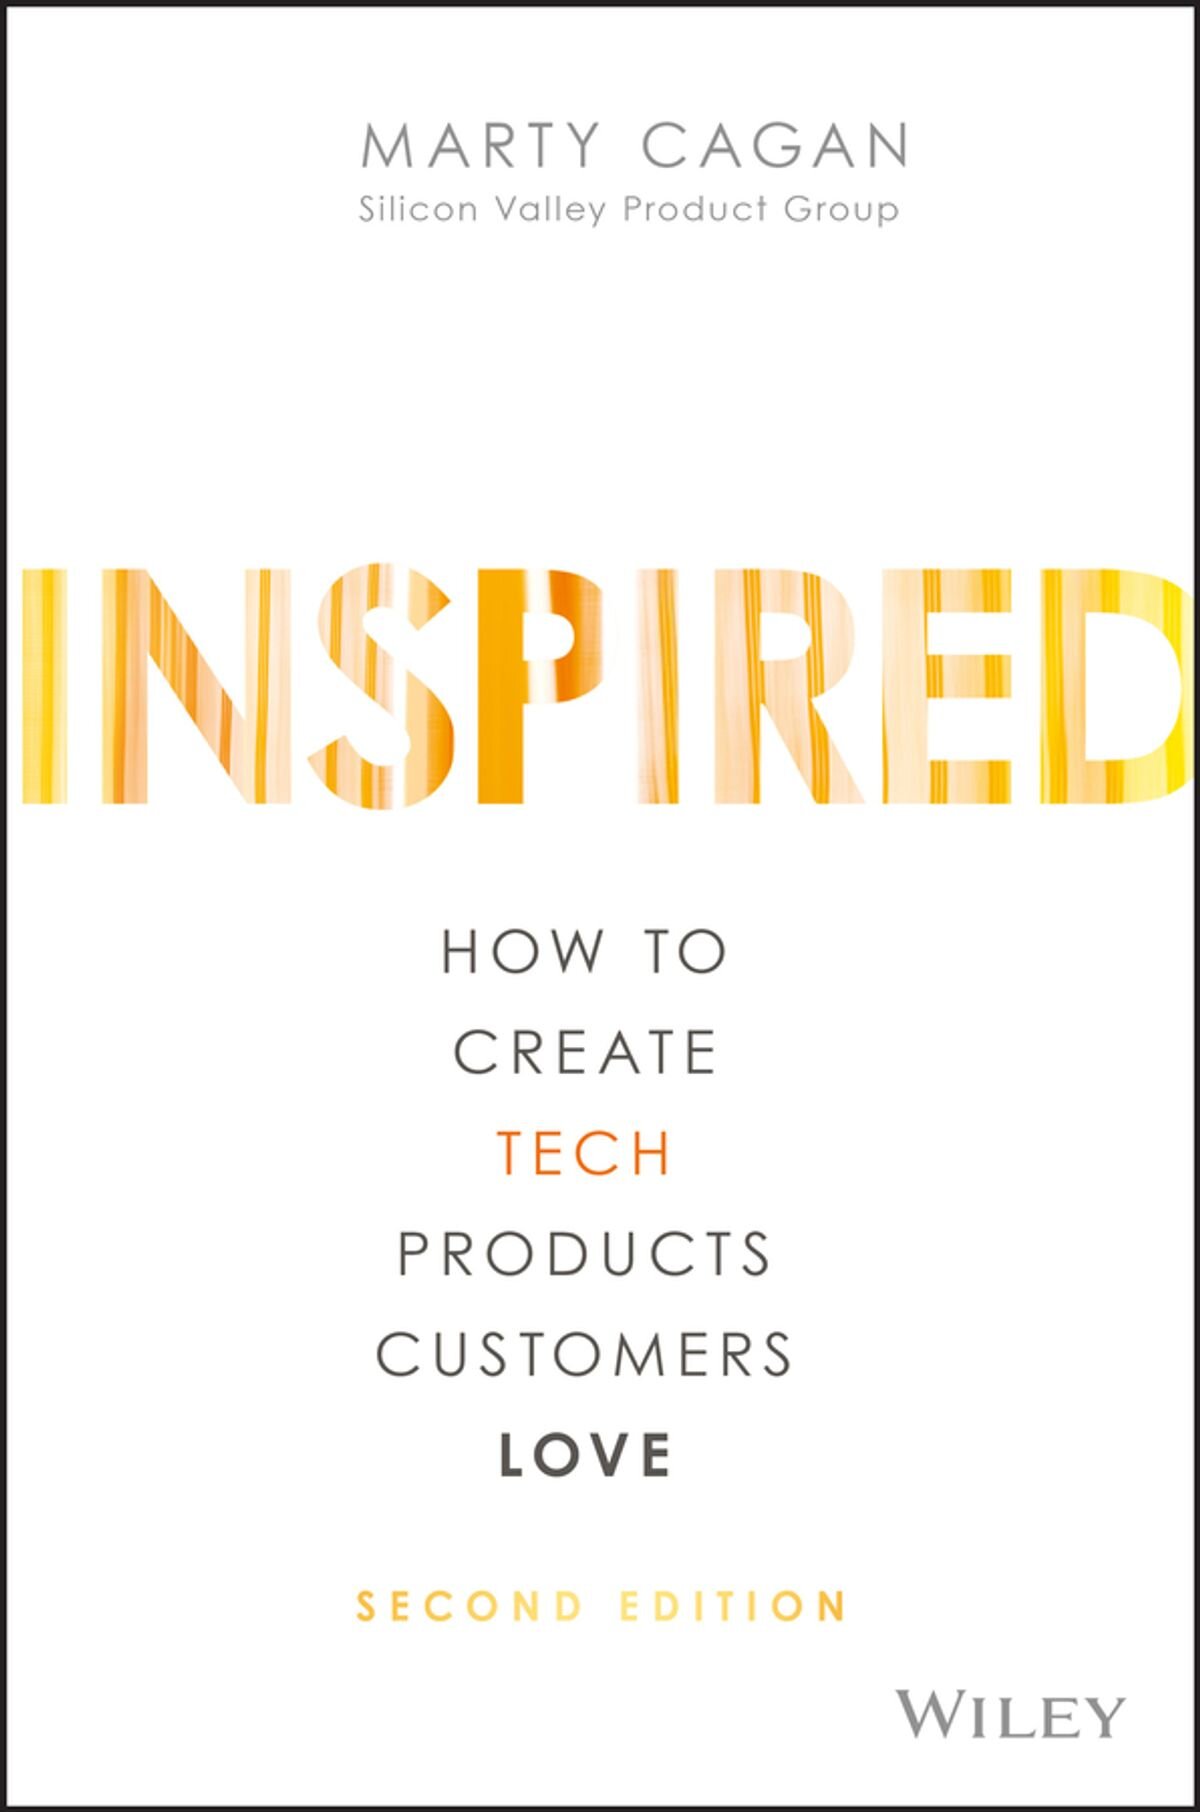 nspired: How to Create Tech Products Customers Love